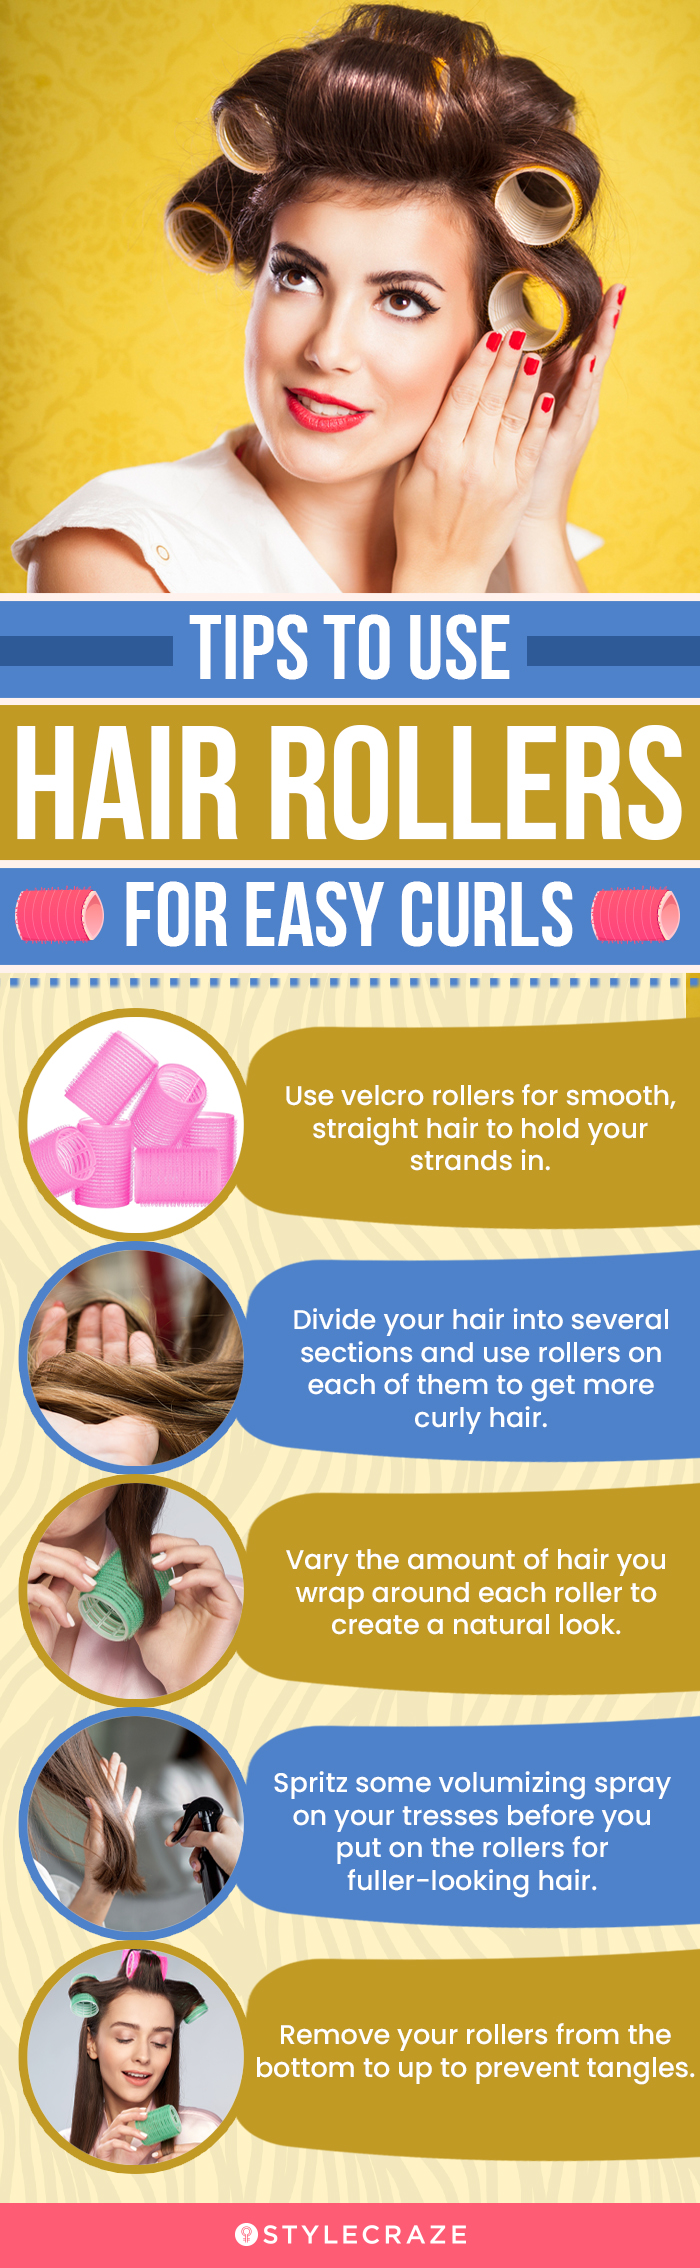 Tips To Use Hair Rollers For Easy Curls (infographic)